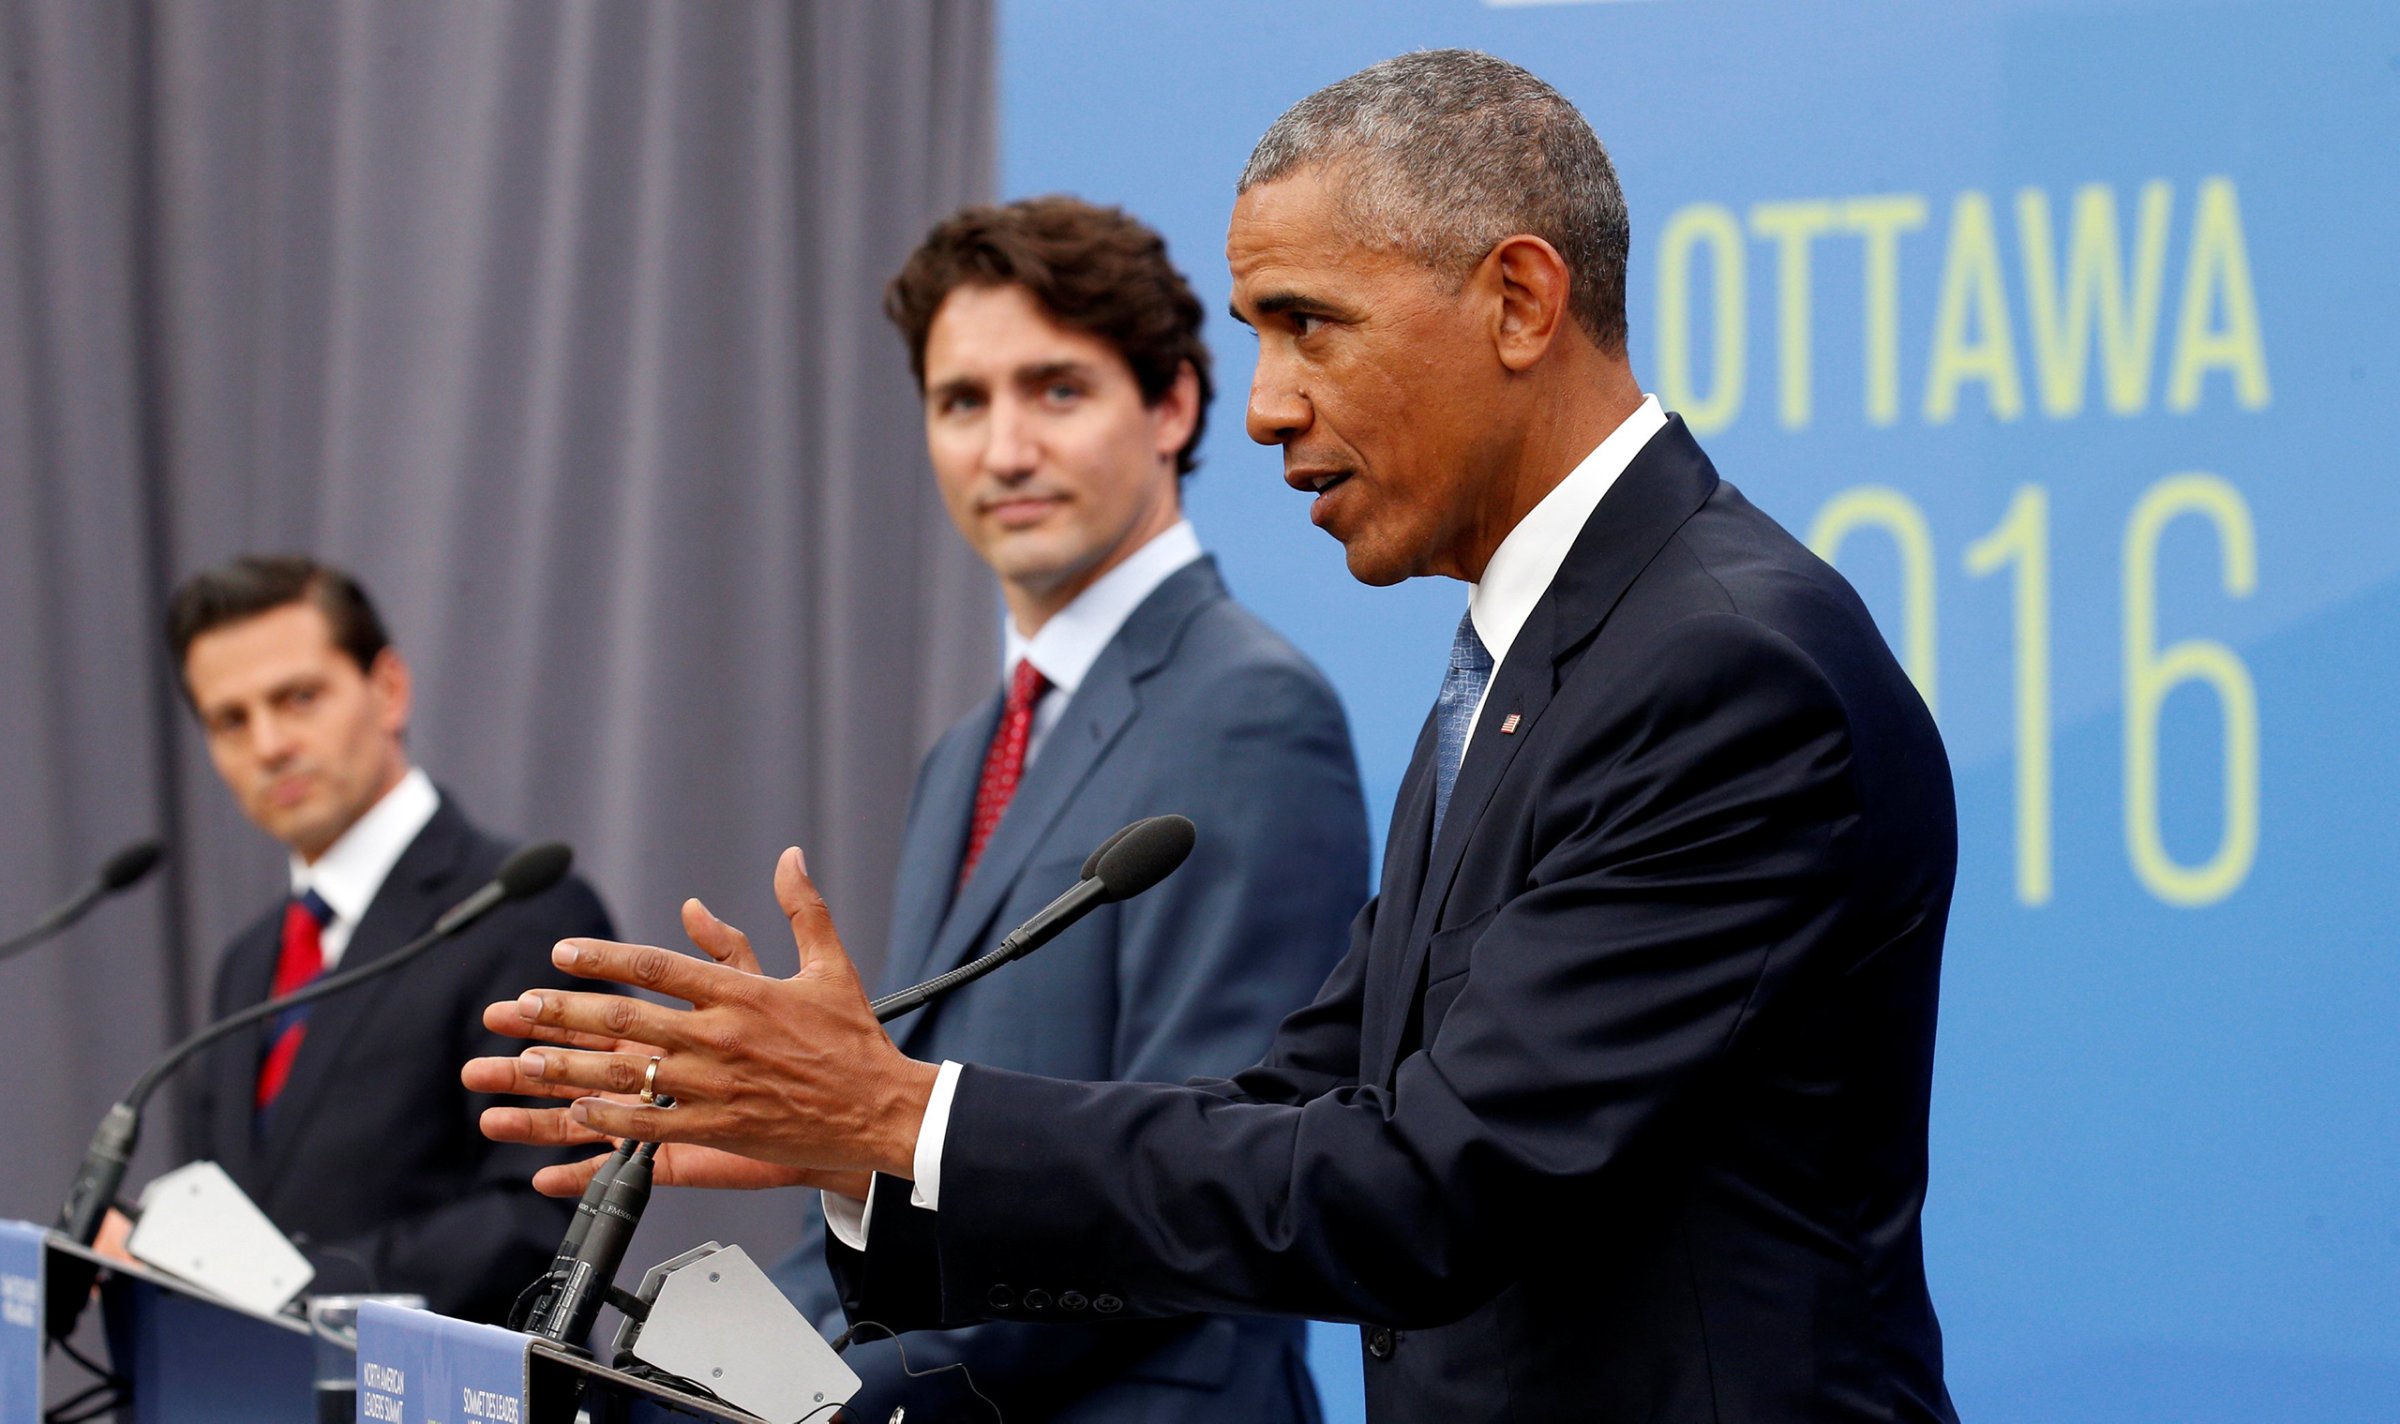 Mexican President Enrique Pena Nieto, (L) Canadian Prime Minister Justin Trudeau (C) and U.S. President Barack Obama take part in a news conference during the North American Leaders' Summit in Ottawa, Canada, on June 29, 2016.